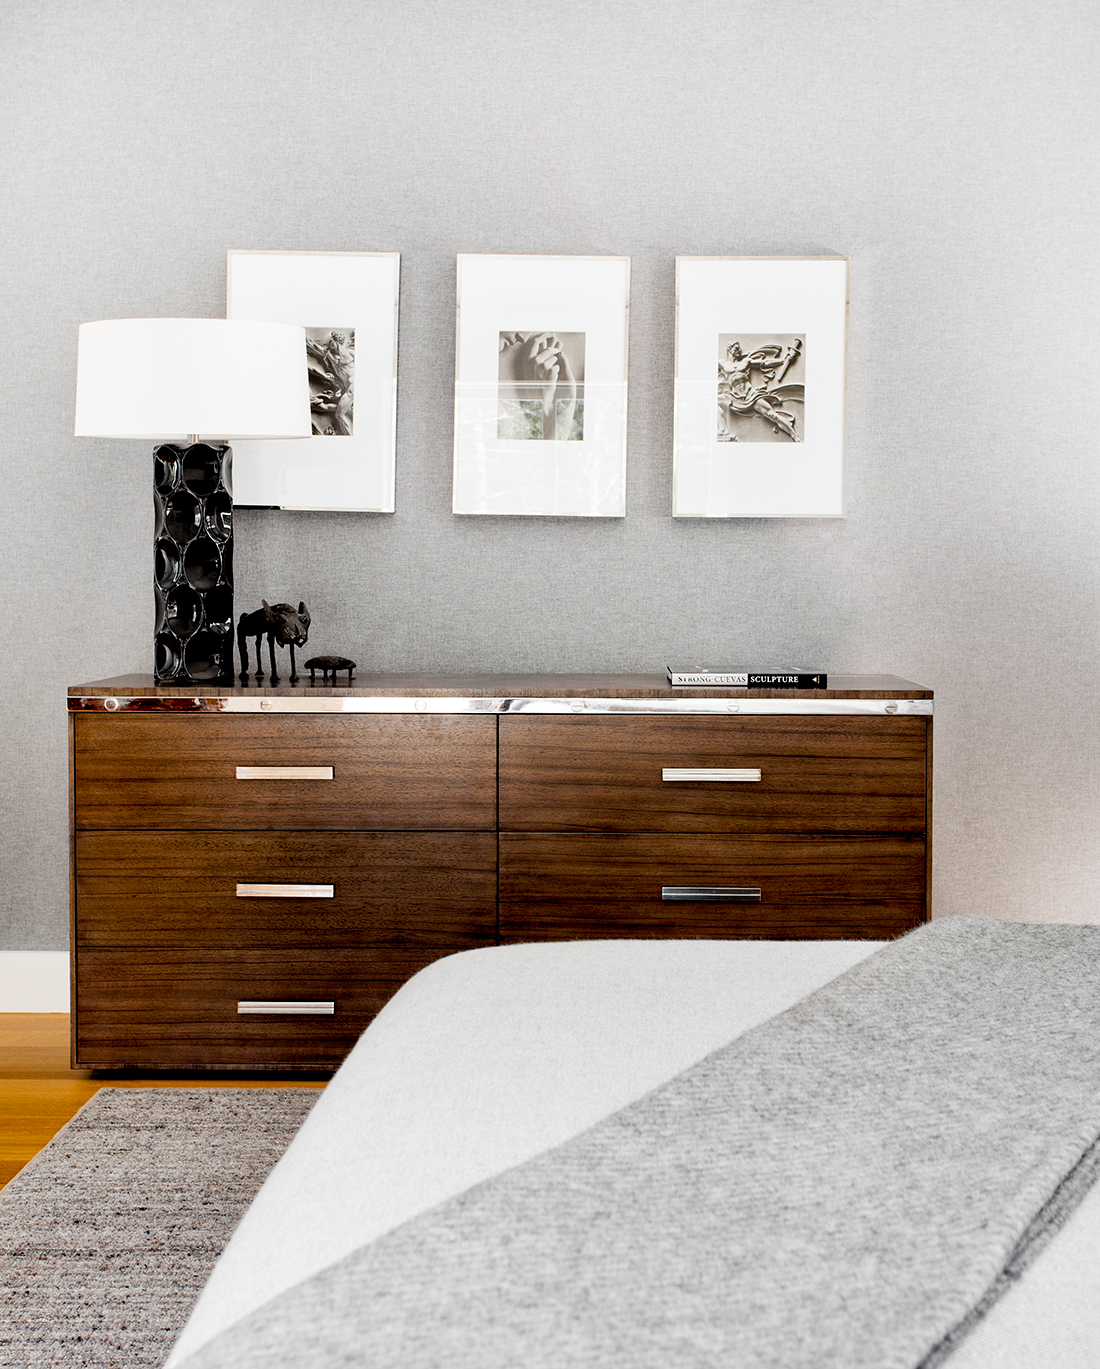 Masculine Monochrome Bedroom | DPAGES